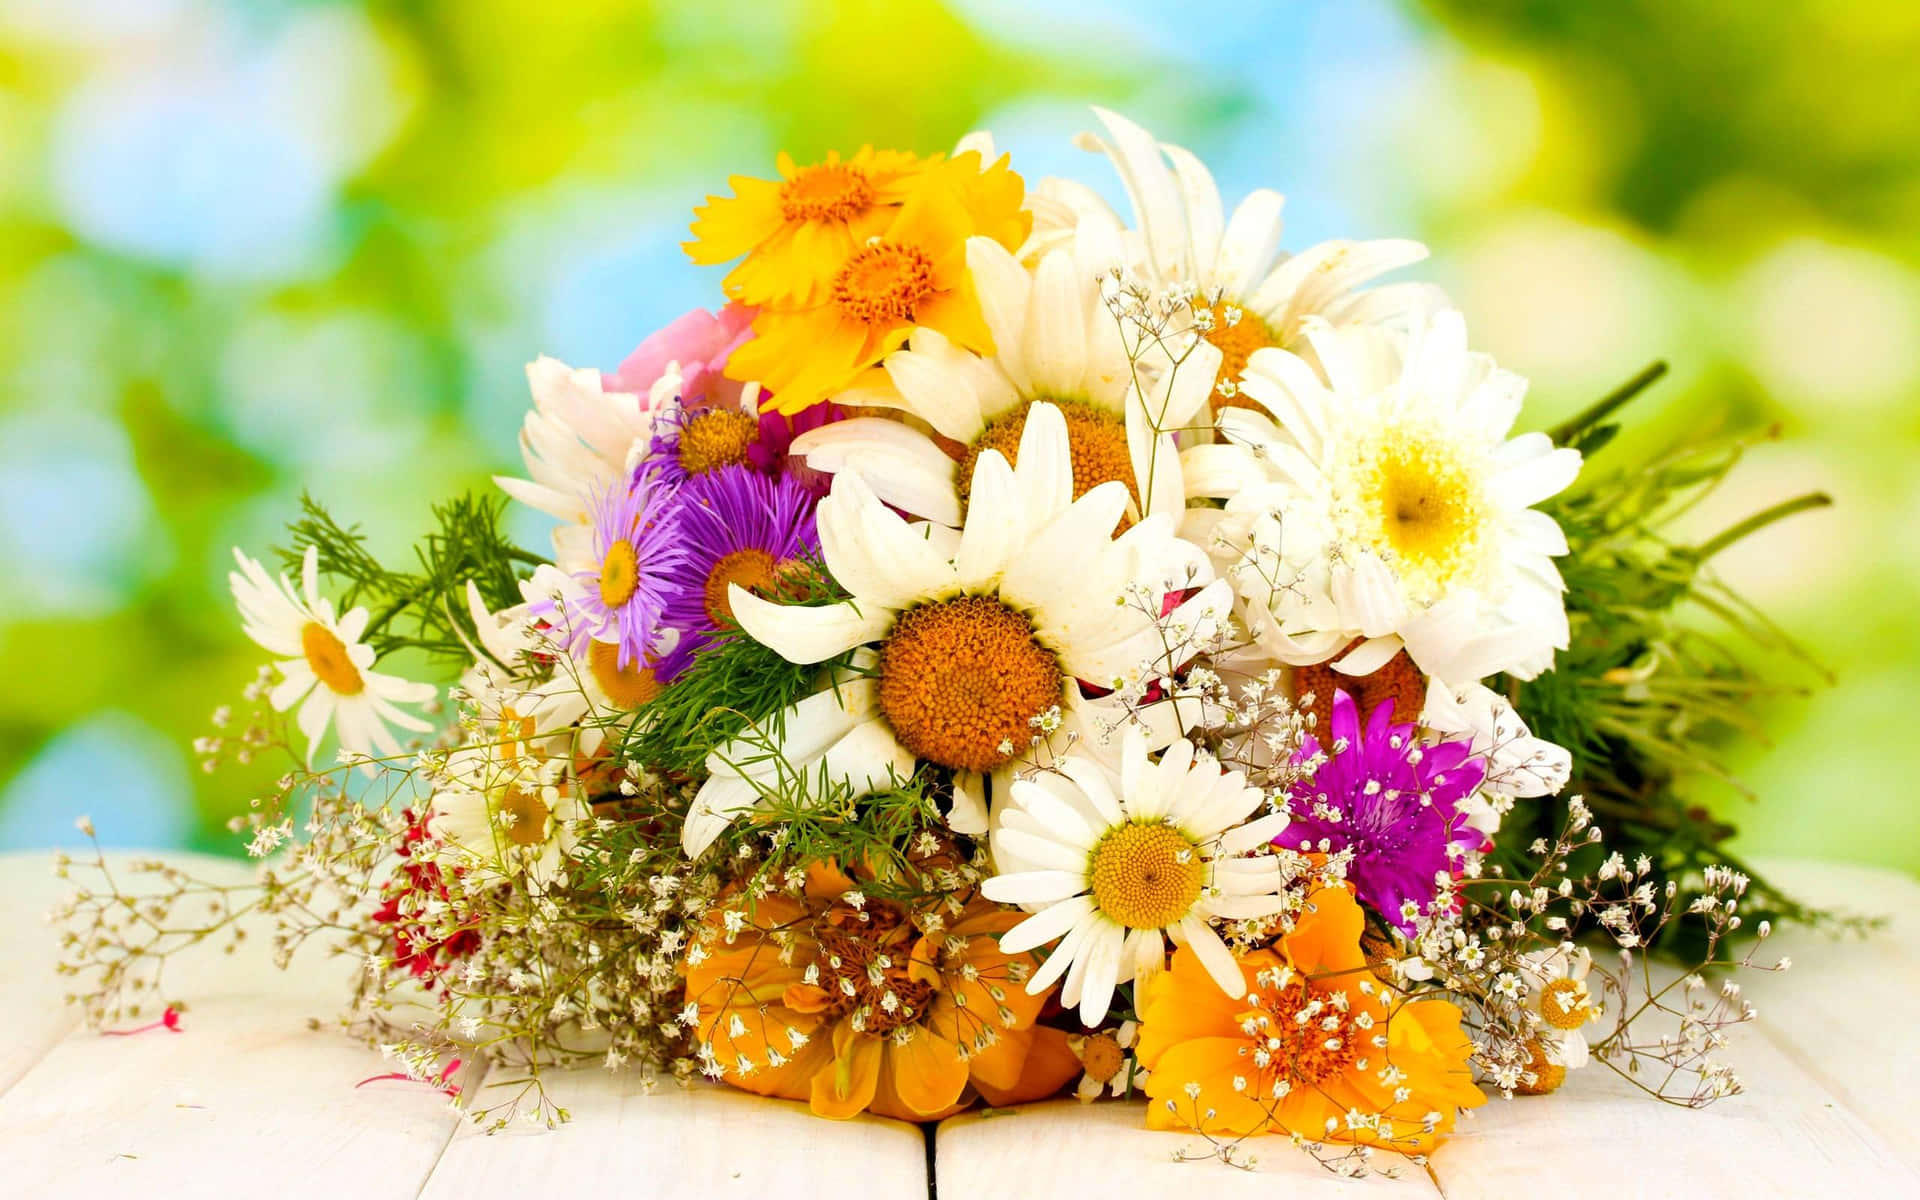 Celebrate Special Occasions with a Fresh Bouquet of Flowers